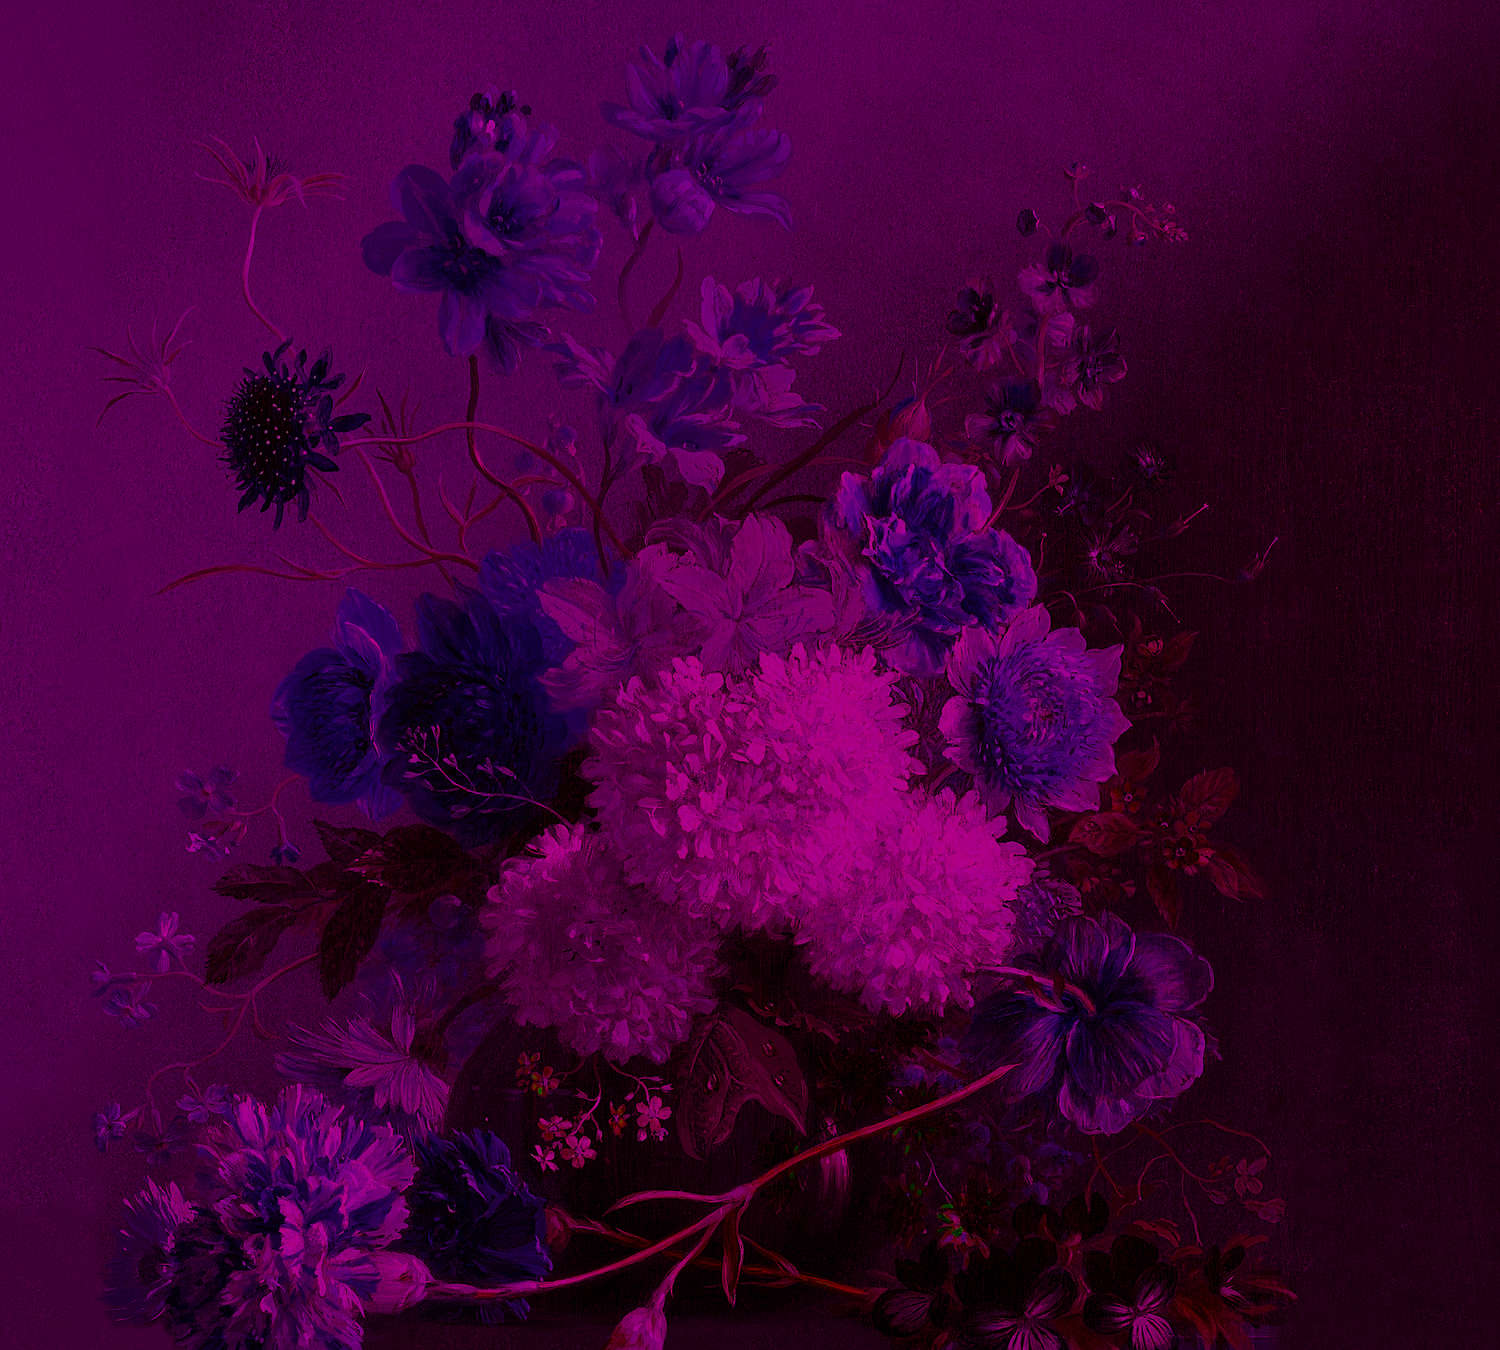             Neon mural with flowers still life - purple, pink
        